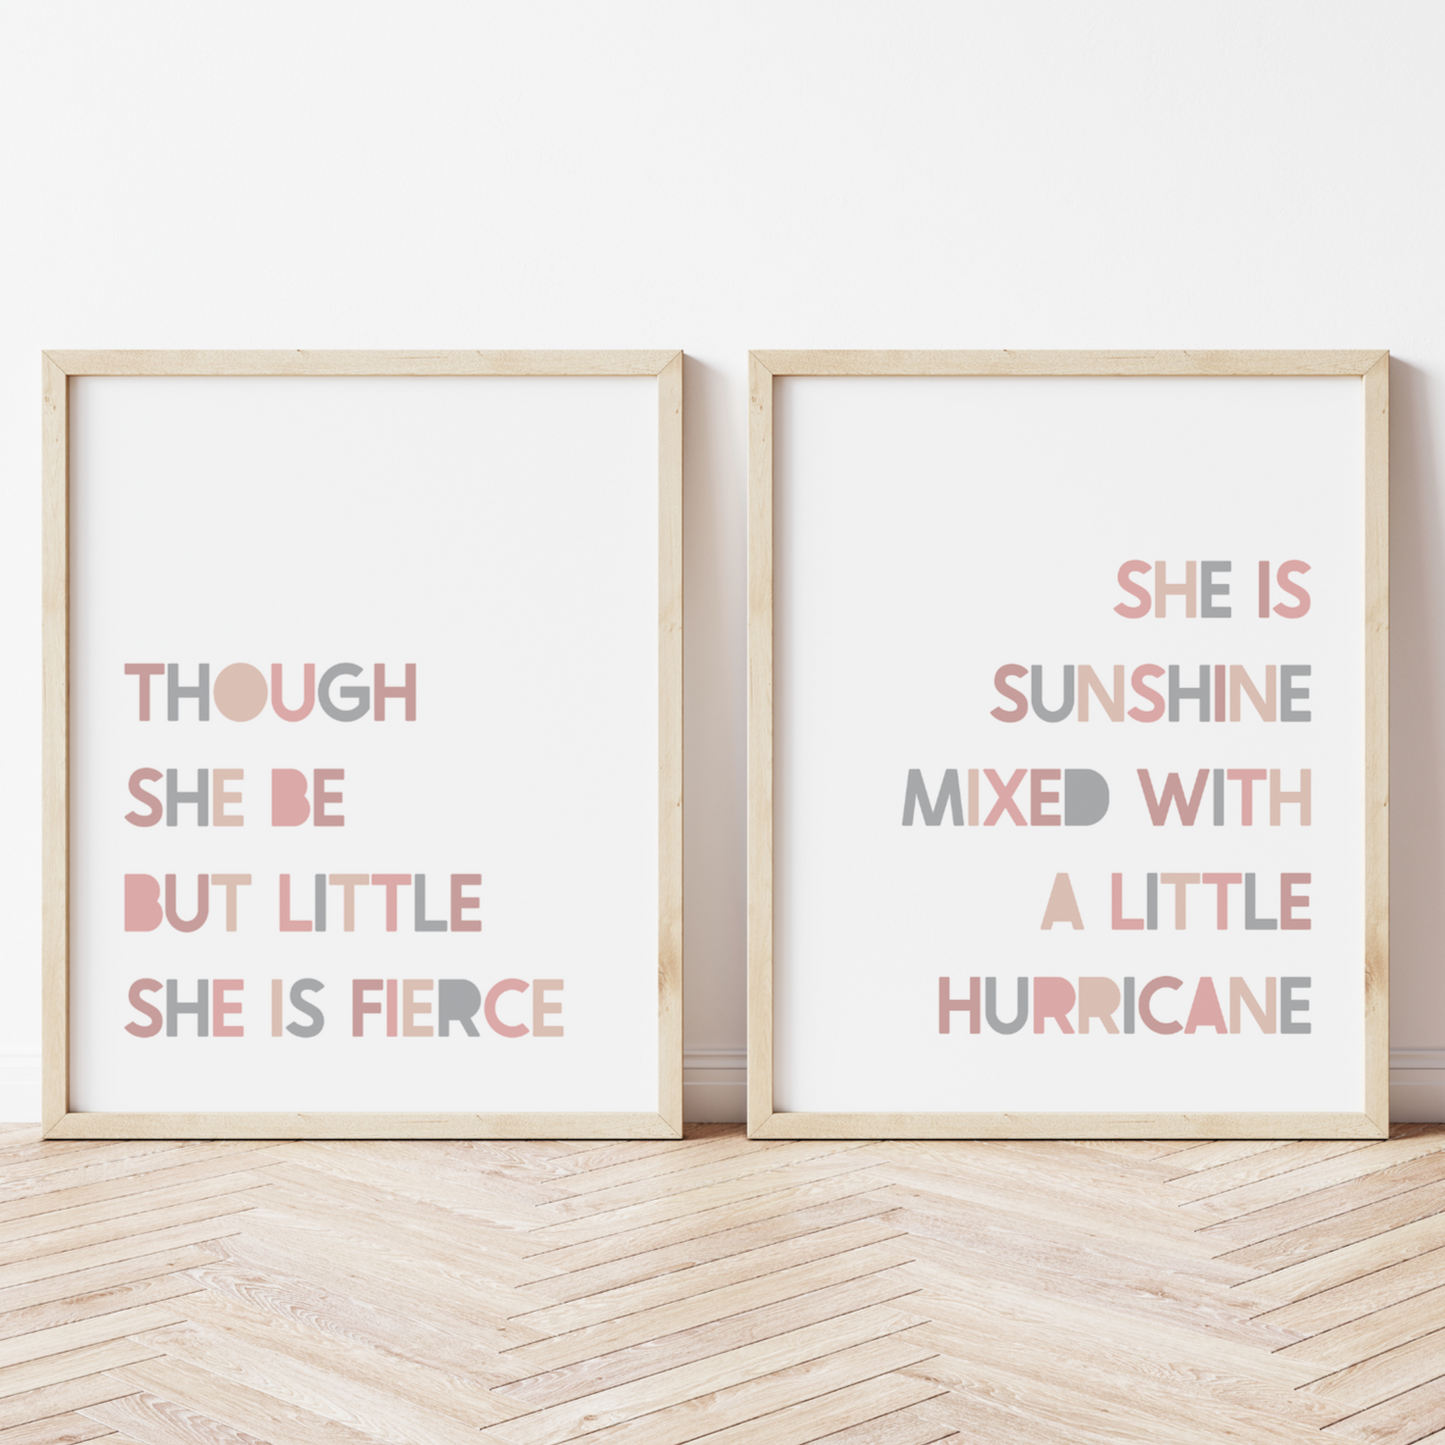 THOUGH SHE BE BUT LITTLE, SHE IS FIERCE Print